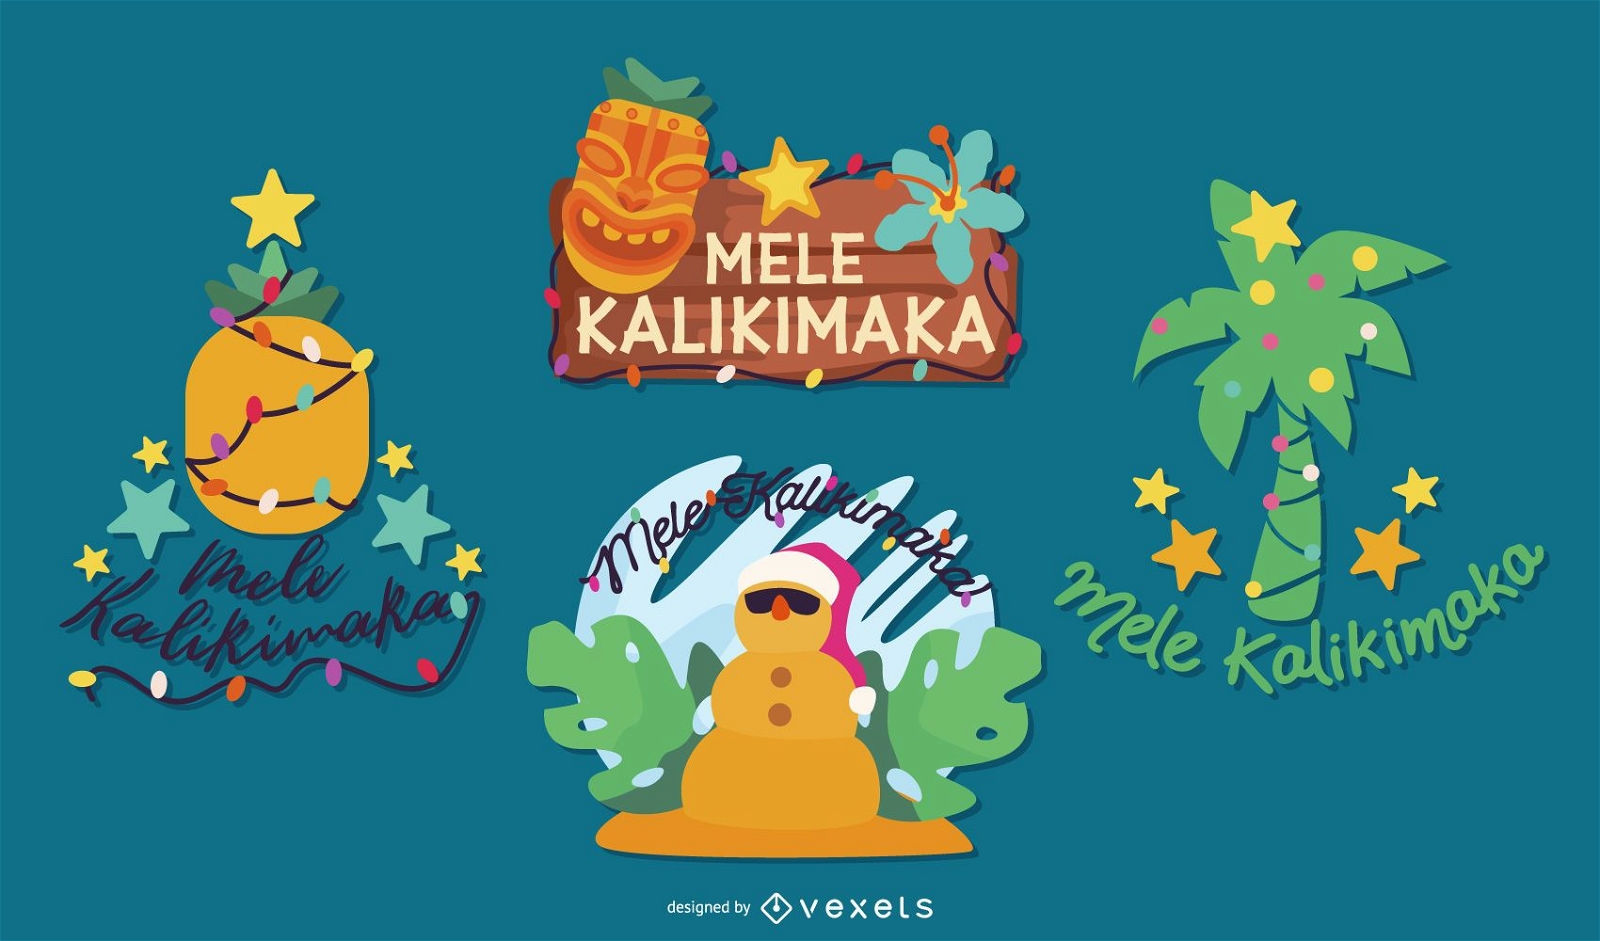 Are you looking for mele kalikimaka transparent illustrions or clipart imag...